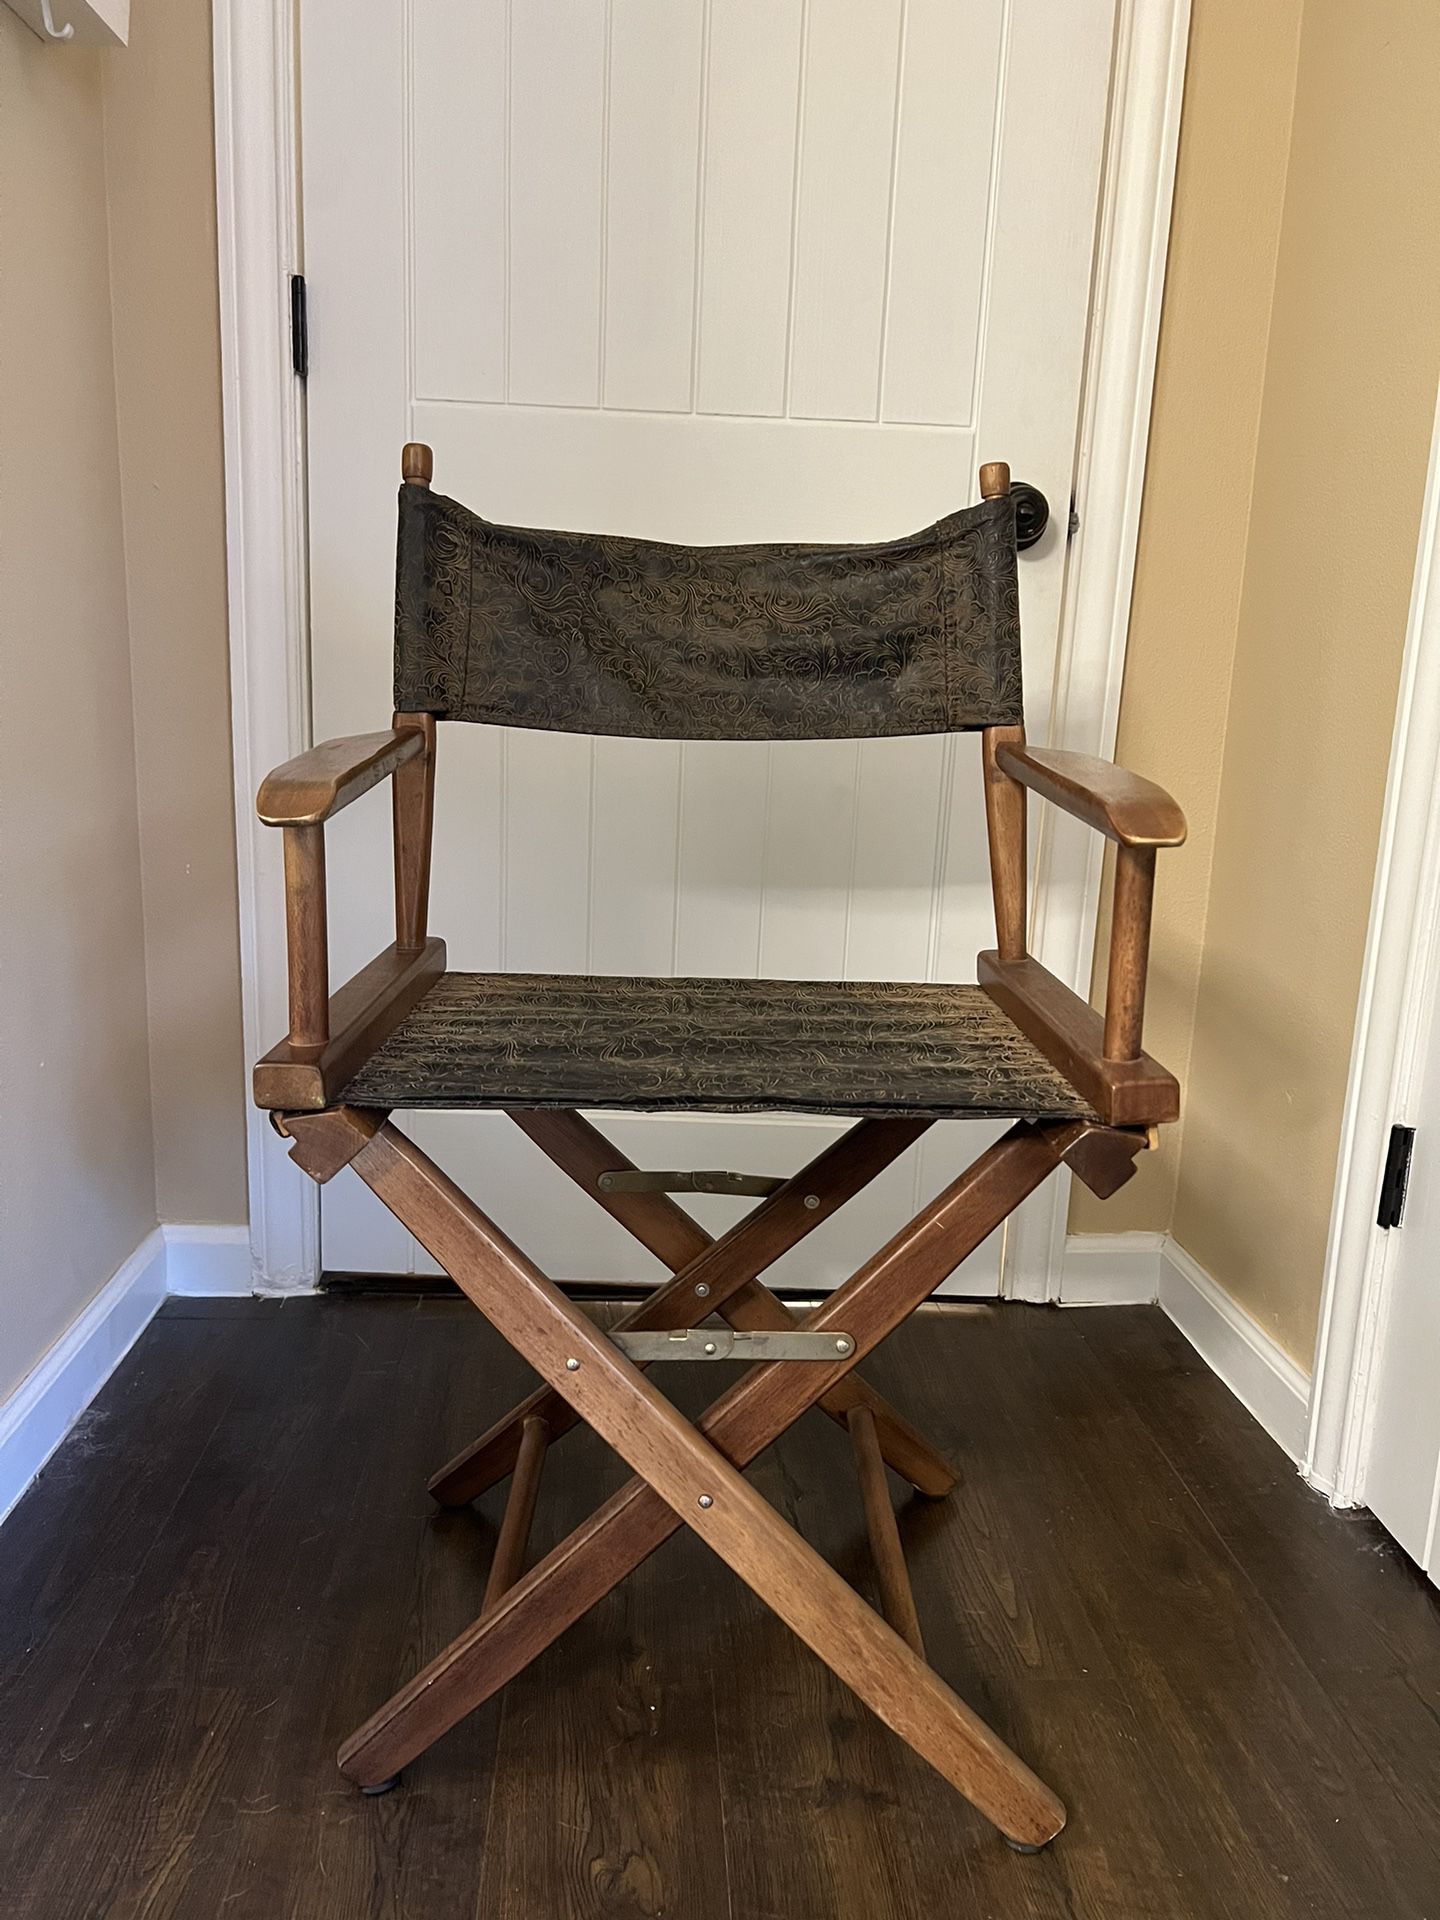 Vintage Director’s Chair - Foldable For Storage! 